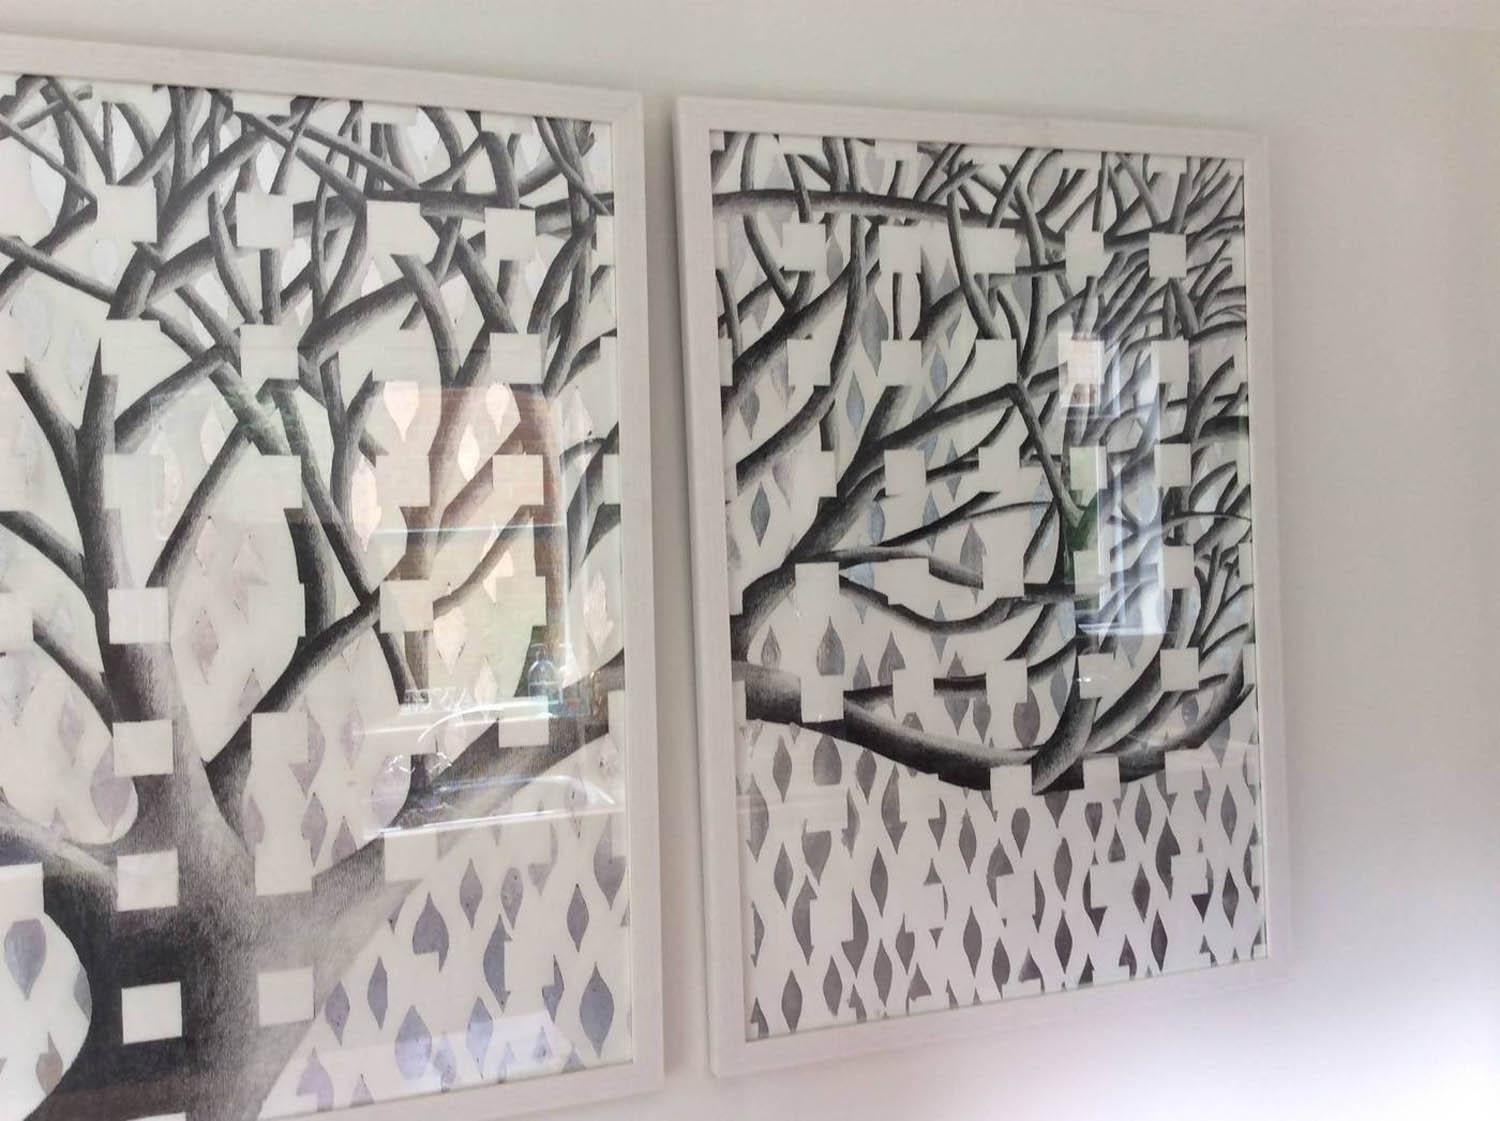 Lorraine Thorne
Original work on paper
framed in 3 seperate frames under glass.
 
Height 100 width 210cm 
Heavy Fabriano paper, graphite, silver leaf
 
Beatrice's Tree was made in Florence whilst on an art residency culminating in an exhibition. It